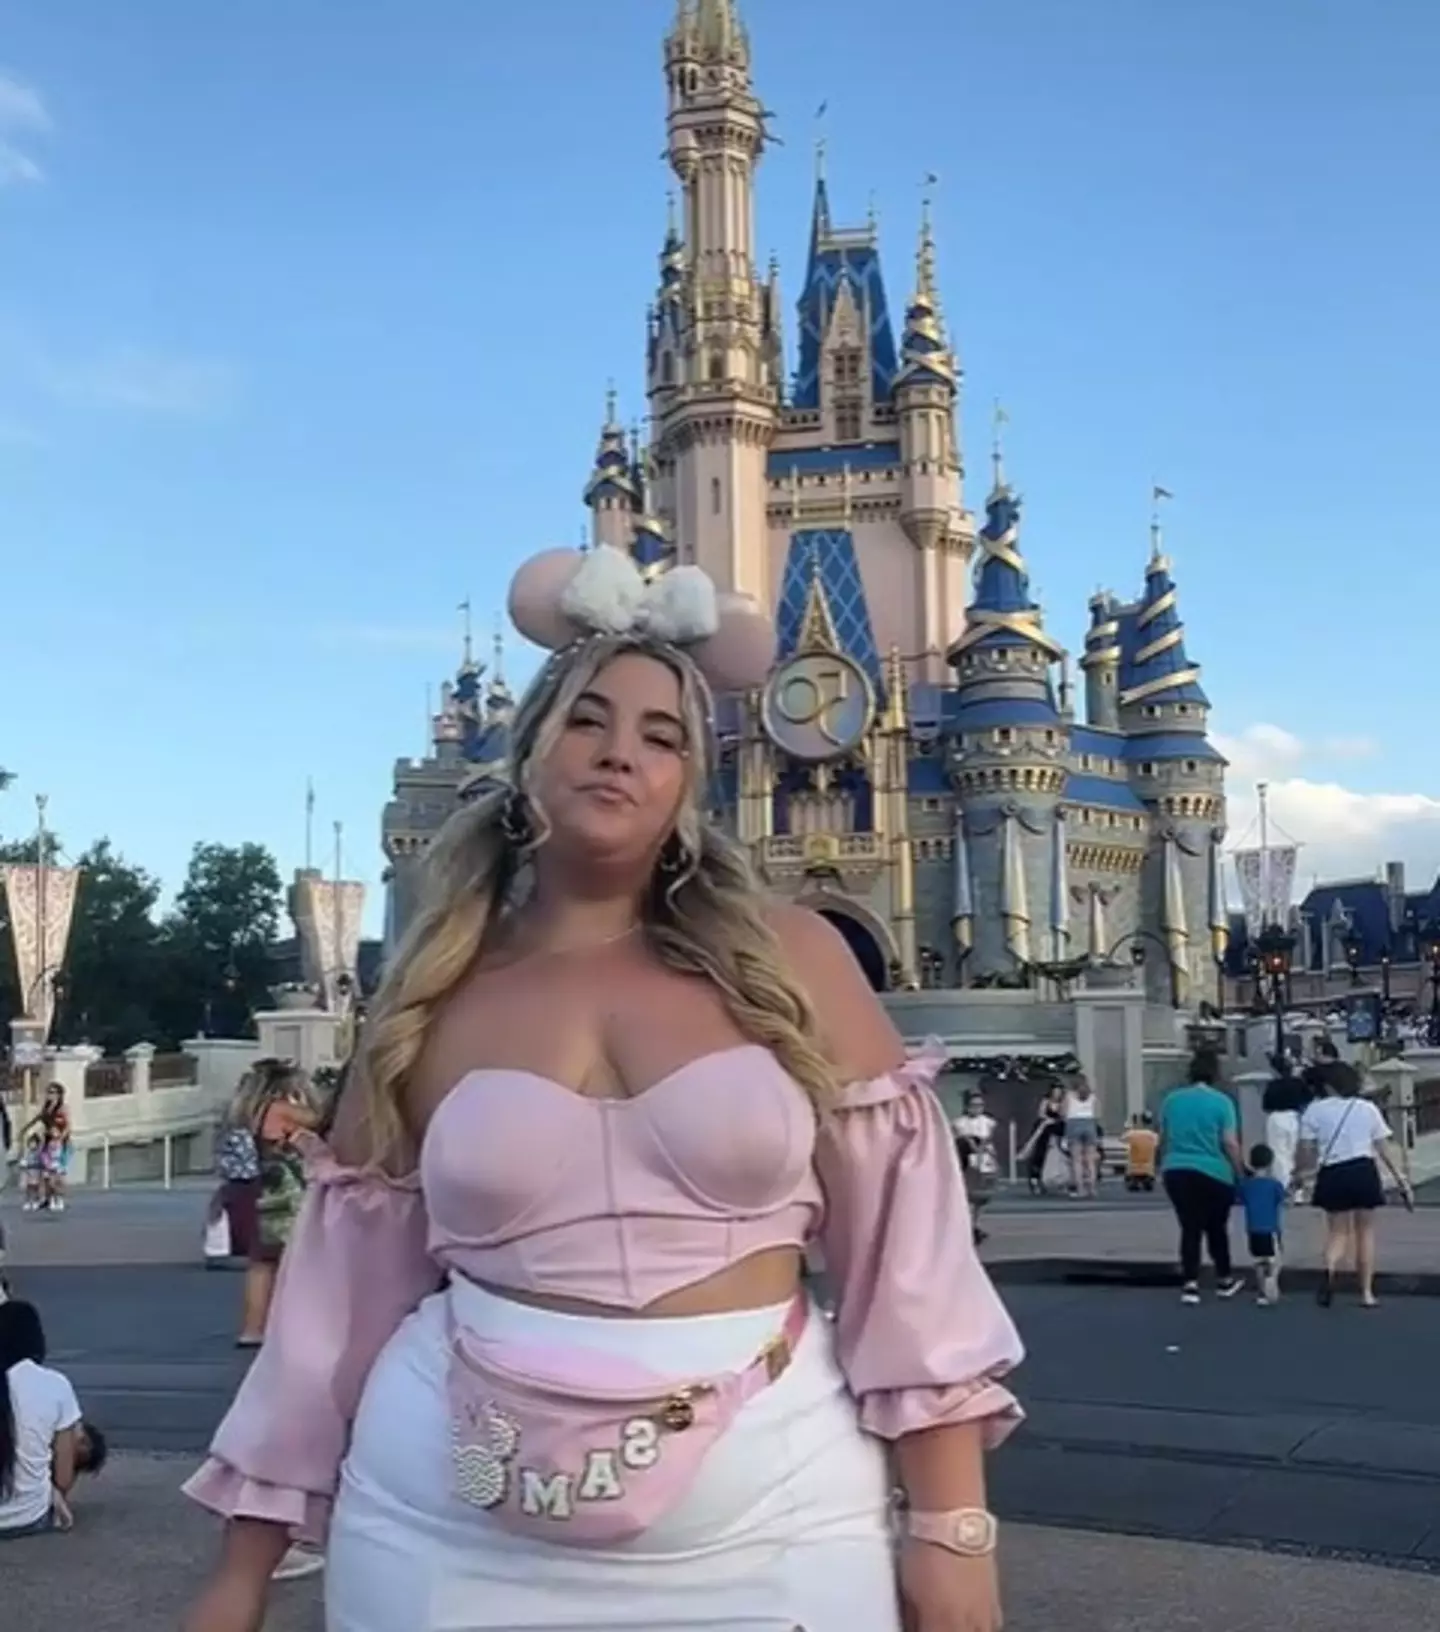 Model Sam Paige was attacked by a troll for her Disney World outfit.